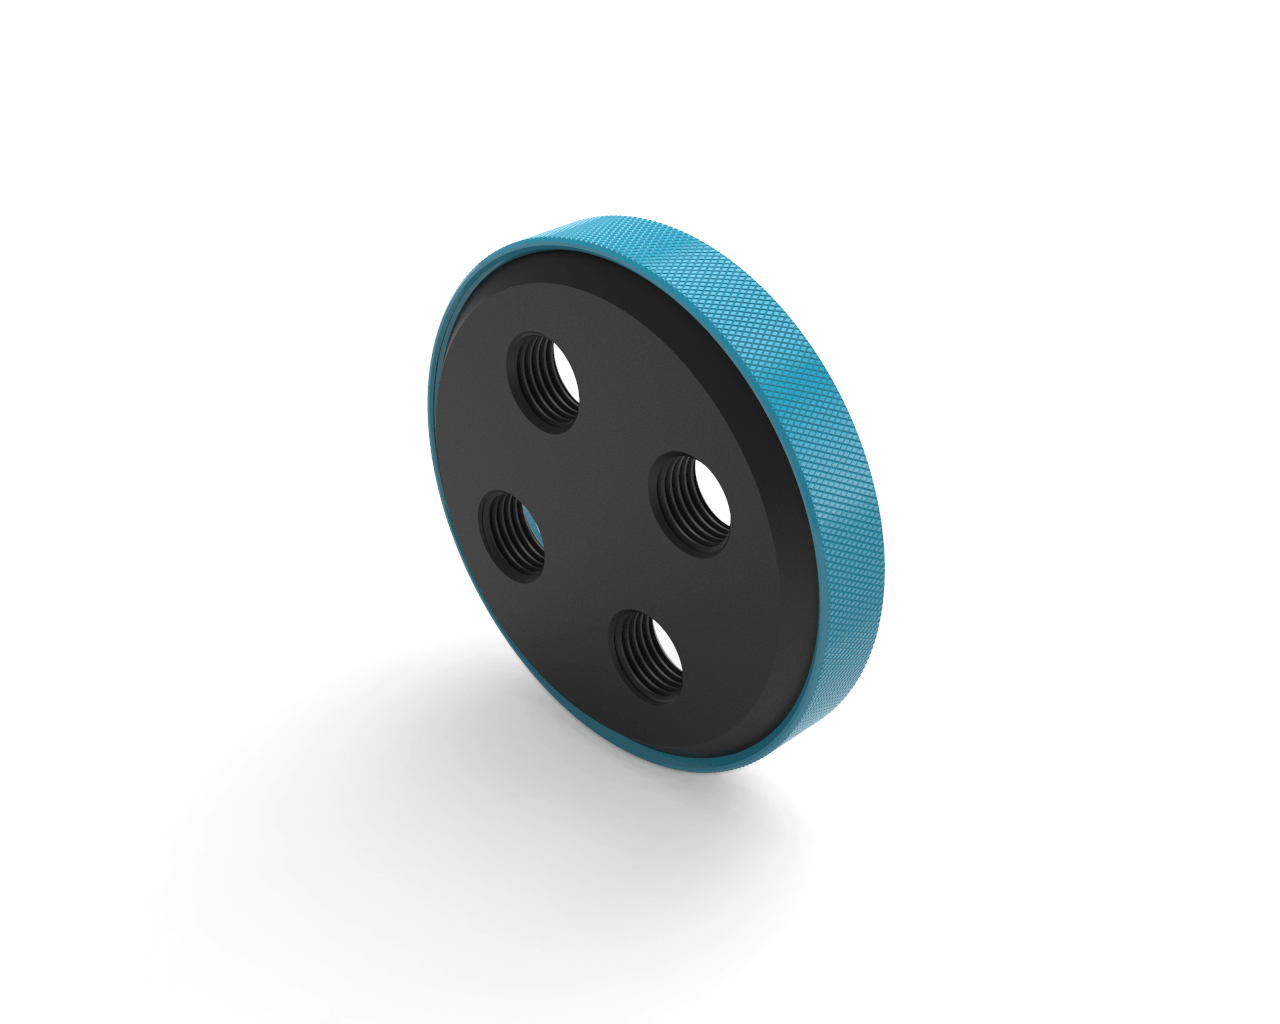 PrimoChill CTR Replacement SX Compression Ring - PrimoChill - KEEPING IT COOL Sky Blue